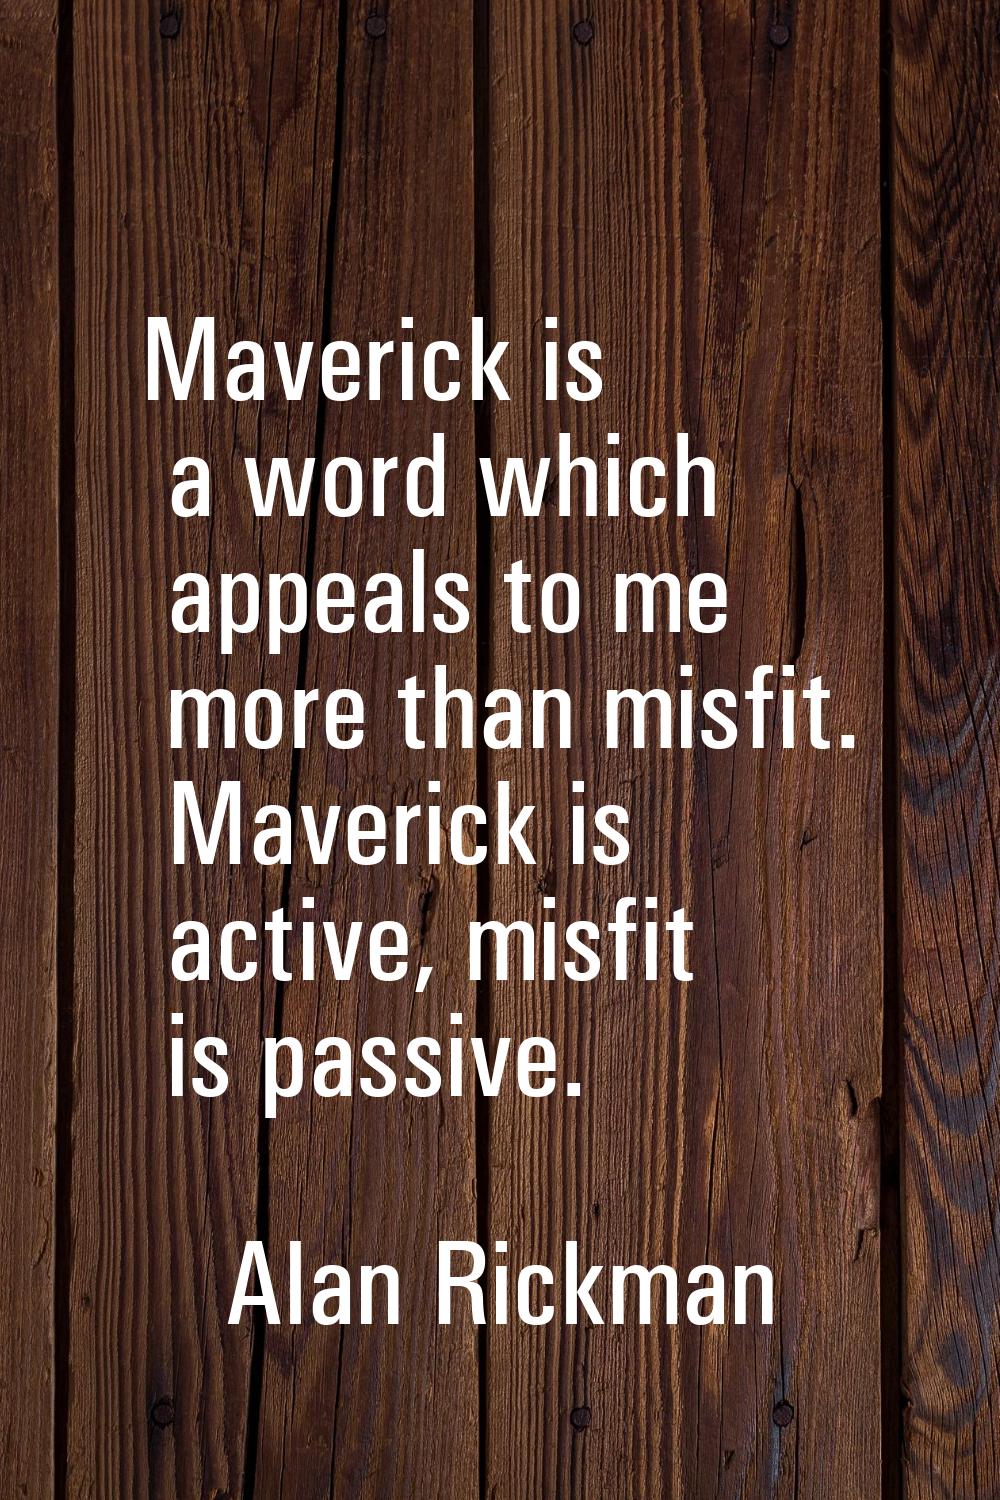 Maverick is a word which appeals to me more than misfit. Maverick is active, misfit is passive.